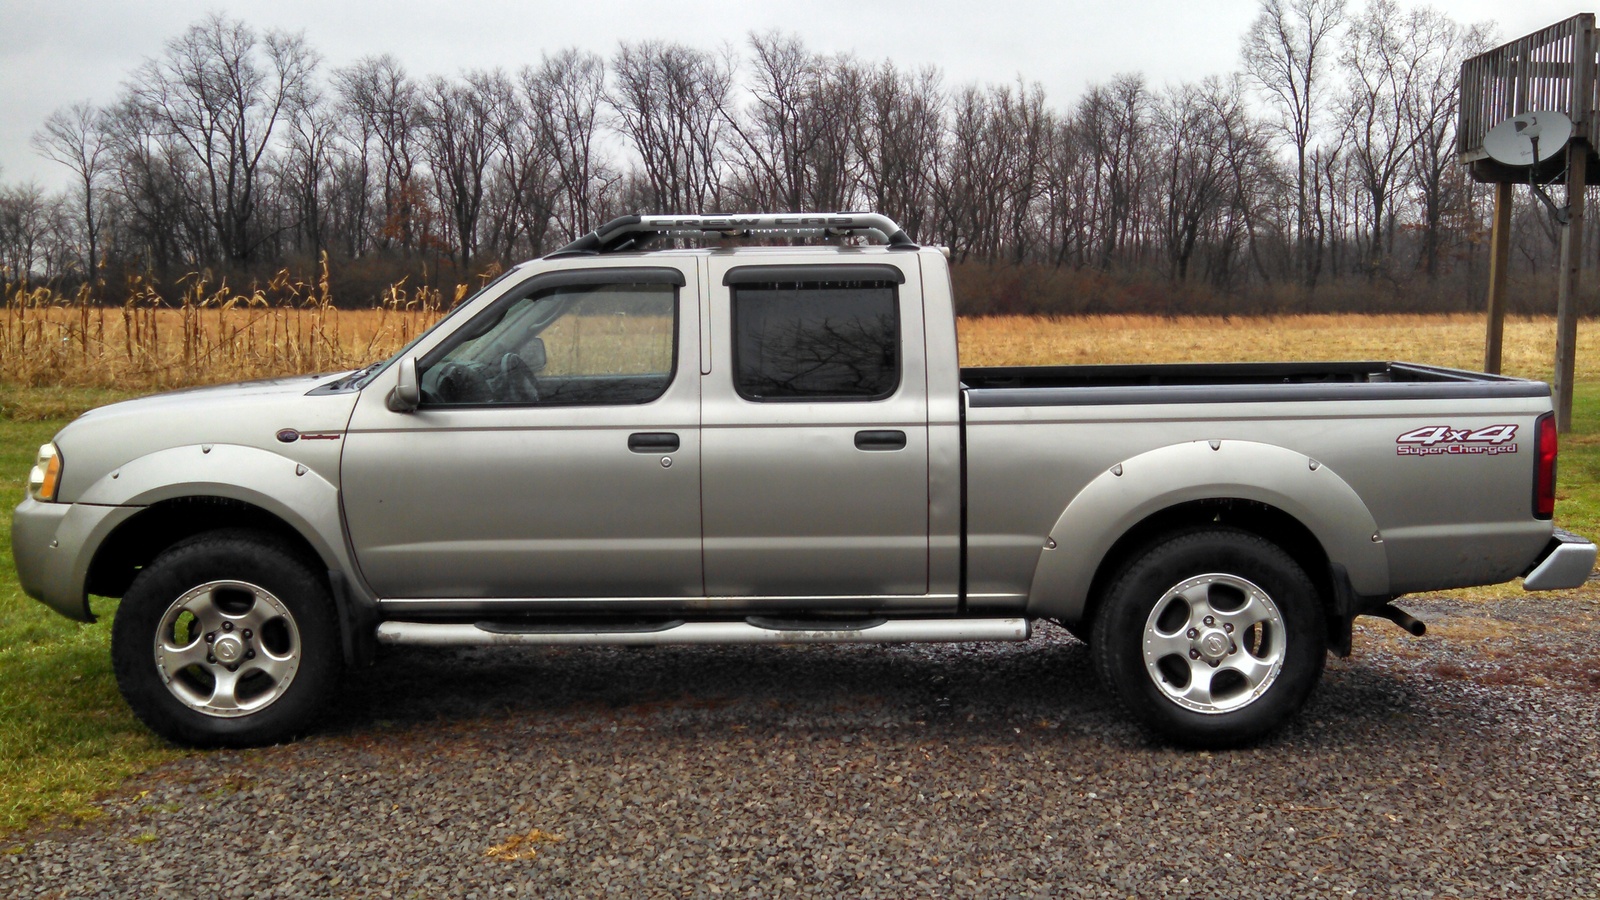 2002 Nissan frontier supercharged review #7